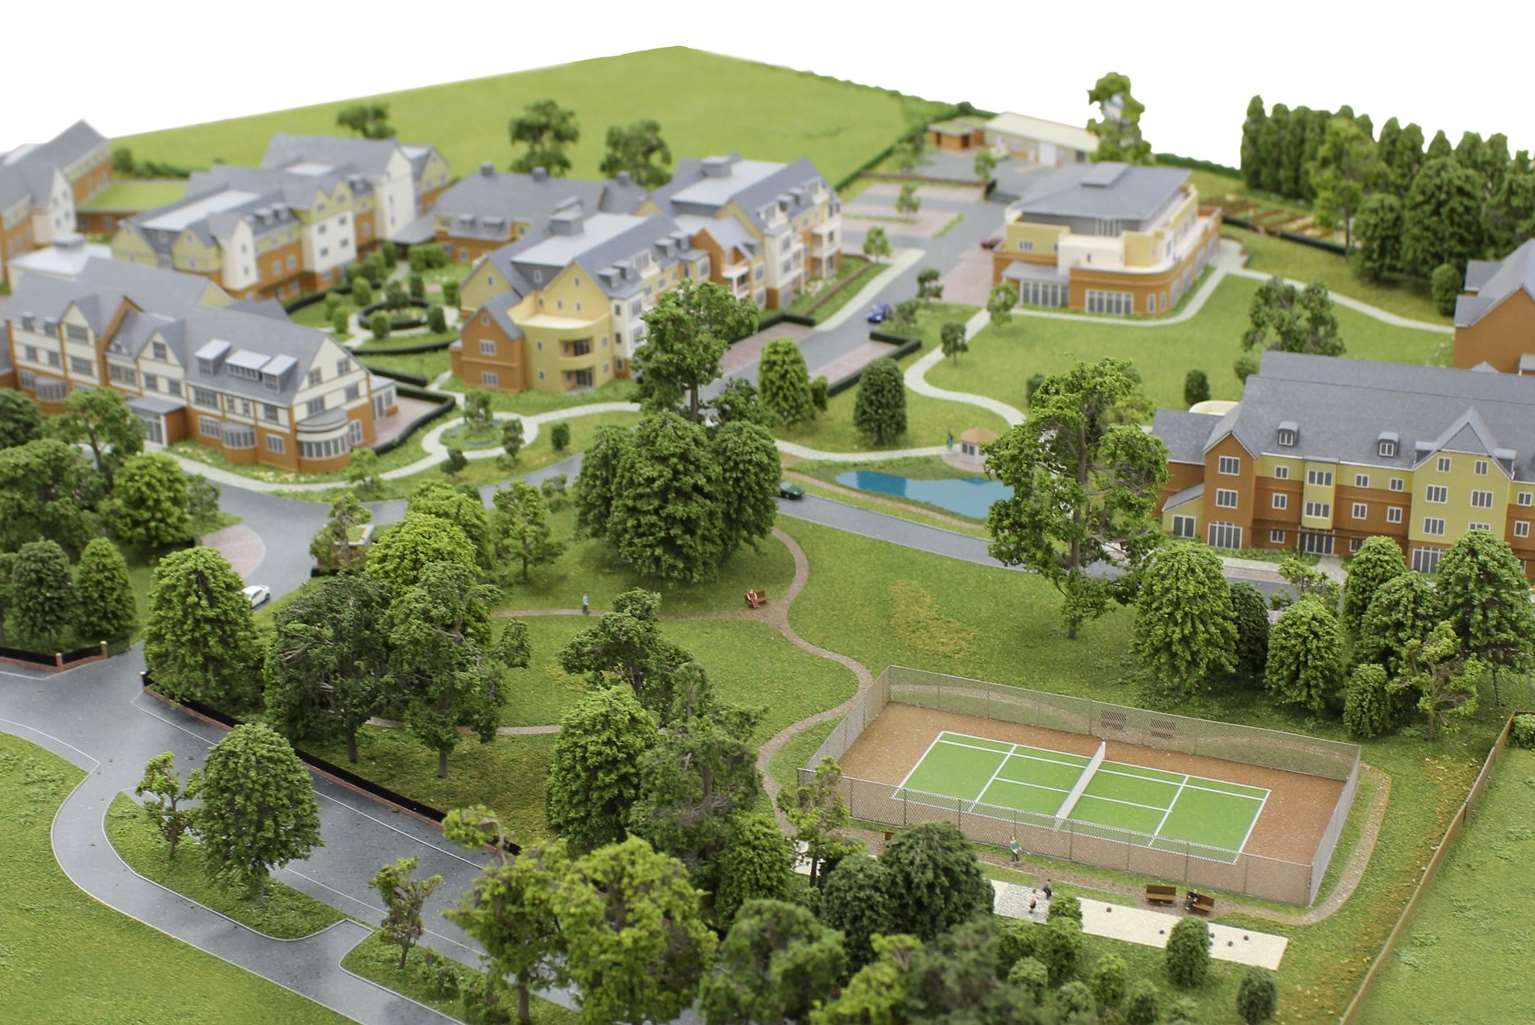 How the Herne Bay Court Retirement Village would have looked